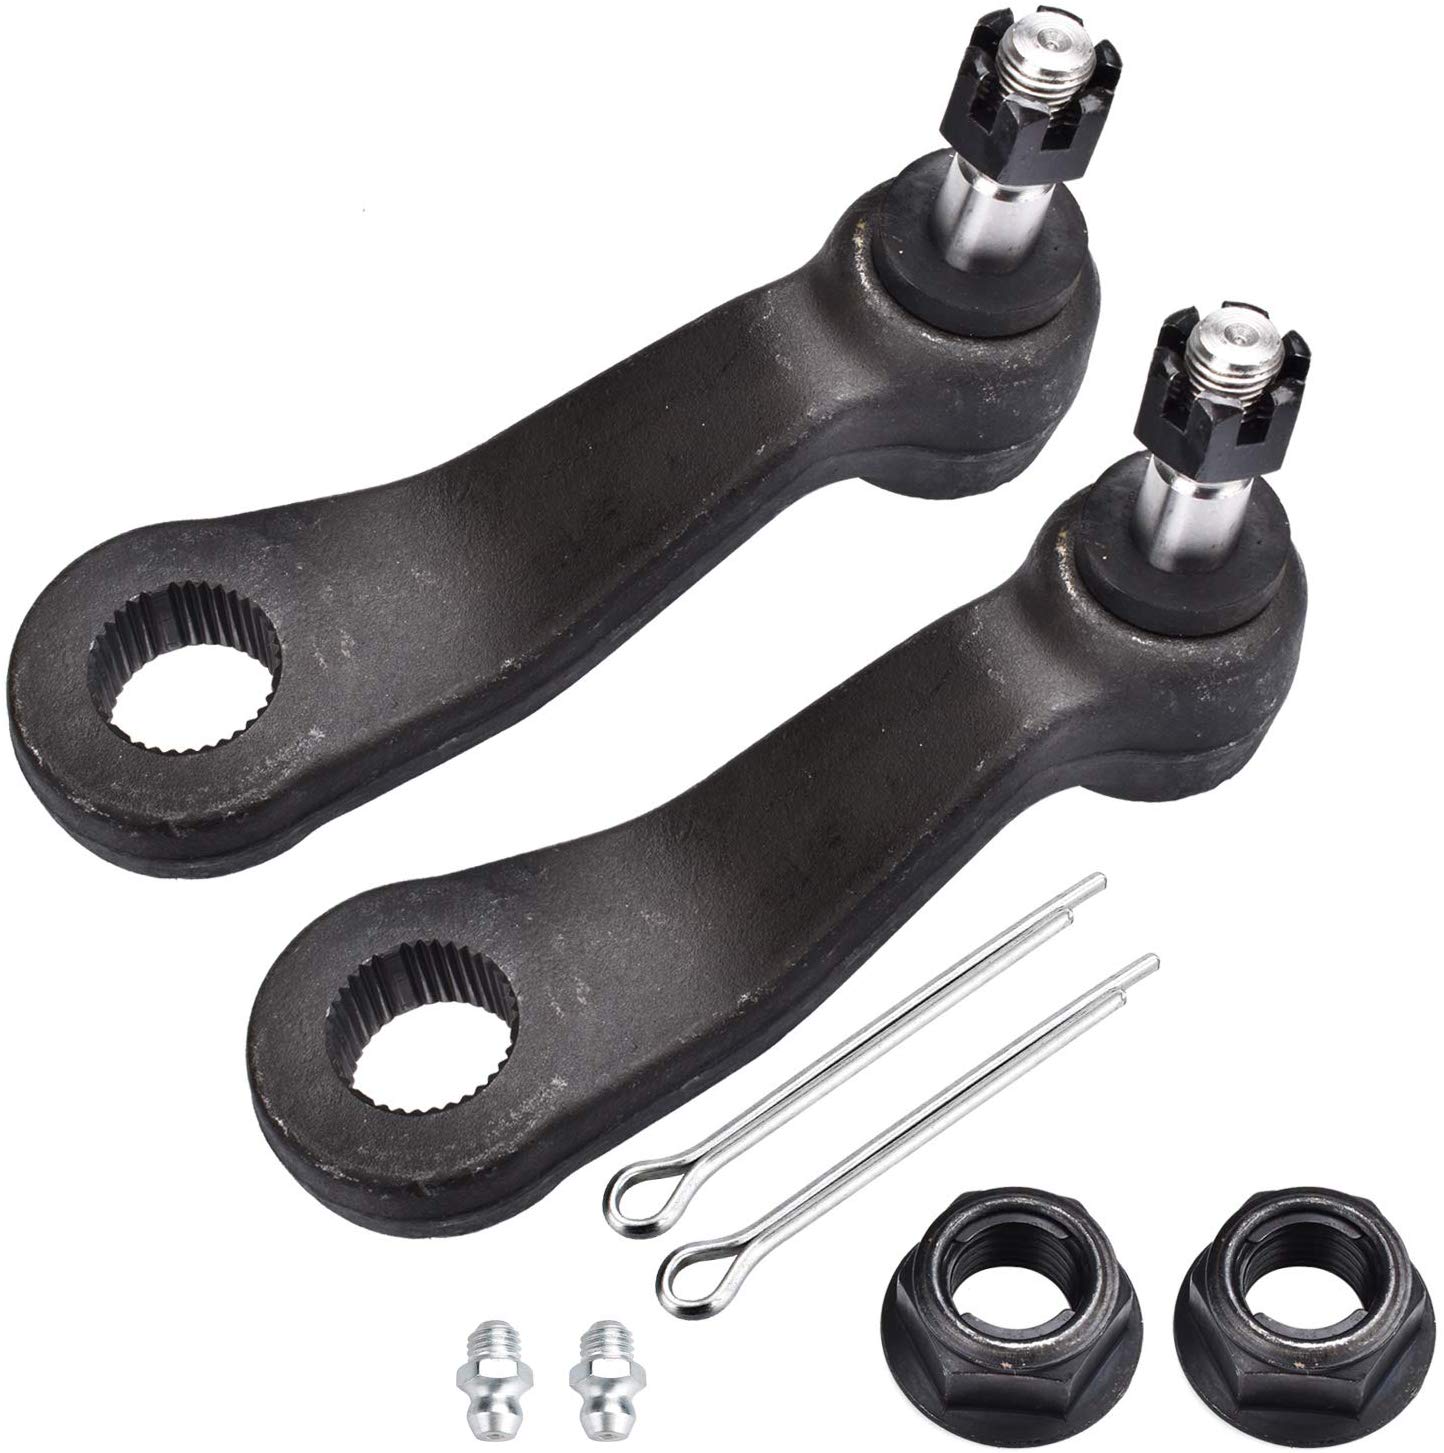 10 pcs Tie Rod Linkages Ball Joint Suspension Kit for Chevy Silverado 2500 HD